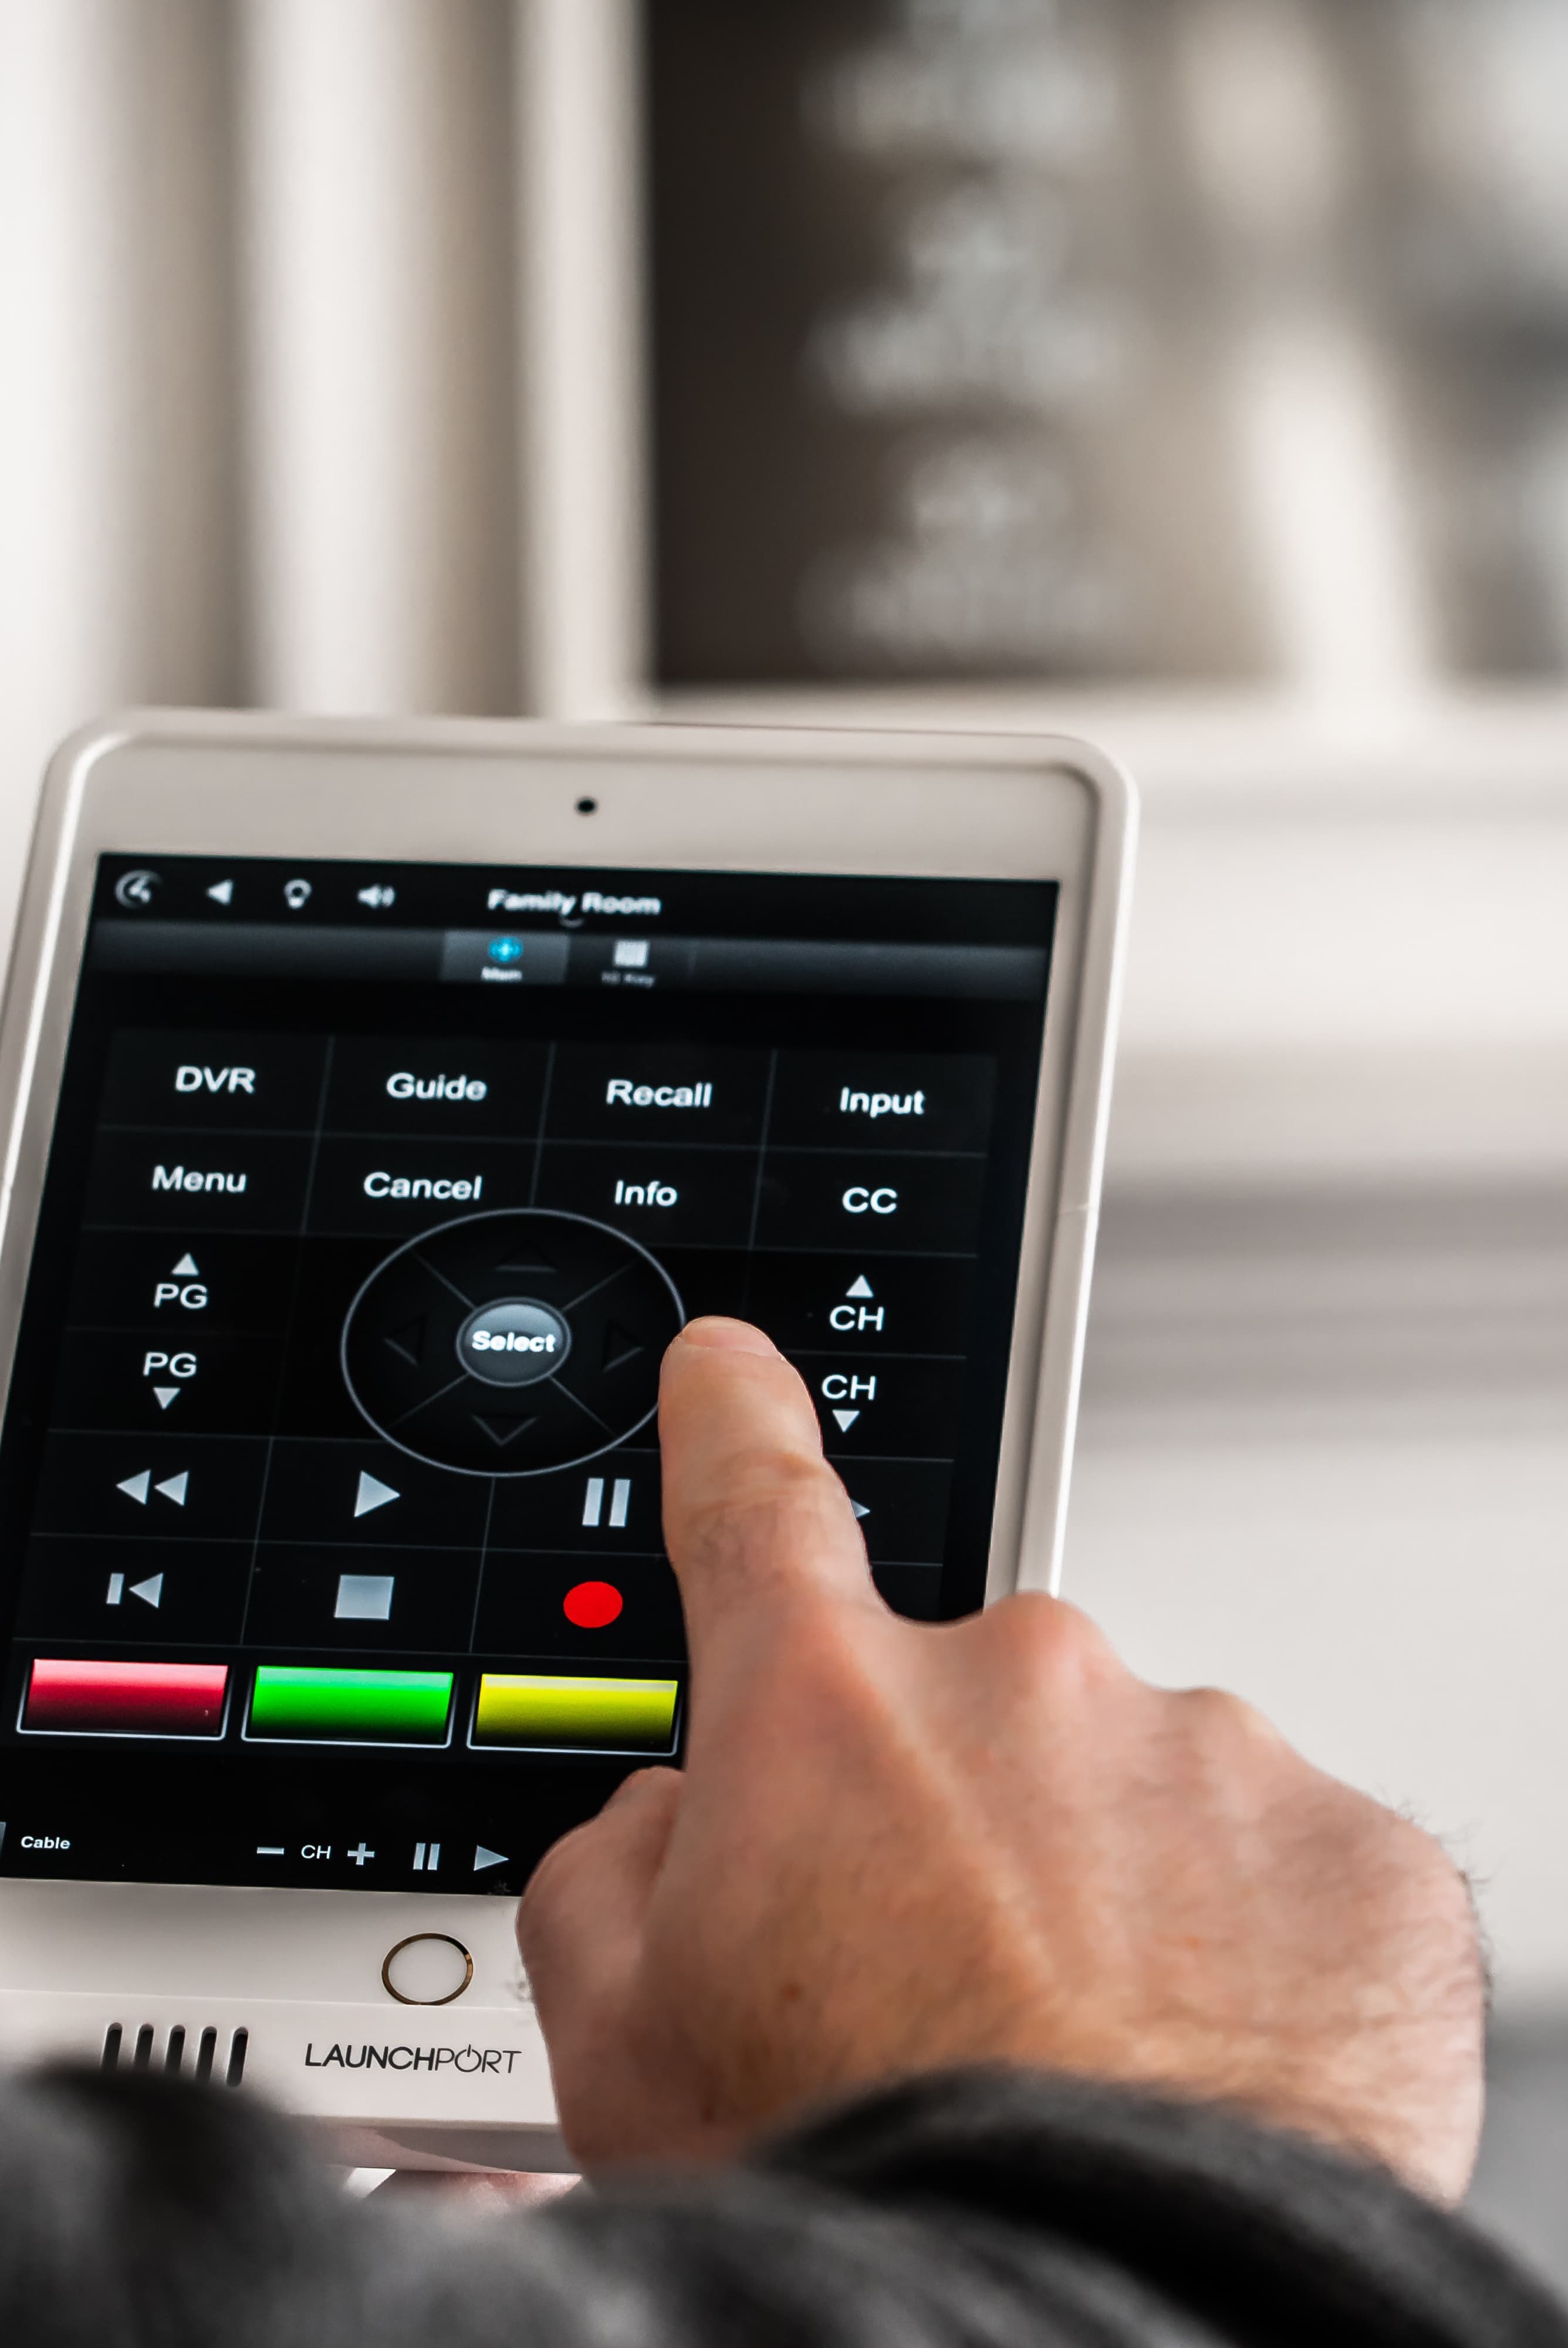 This image shows someone using an app on their ipad to control their home theatre system.